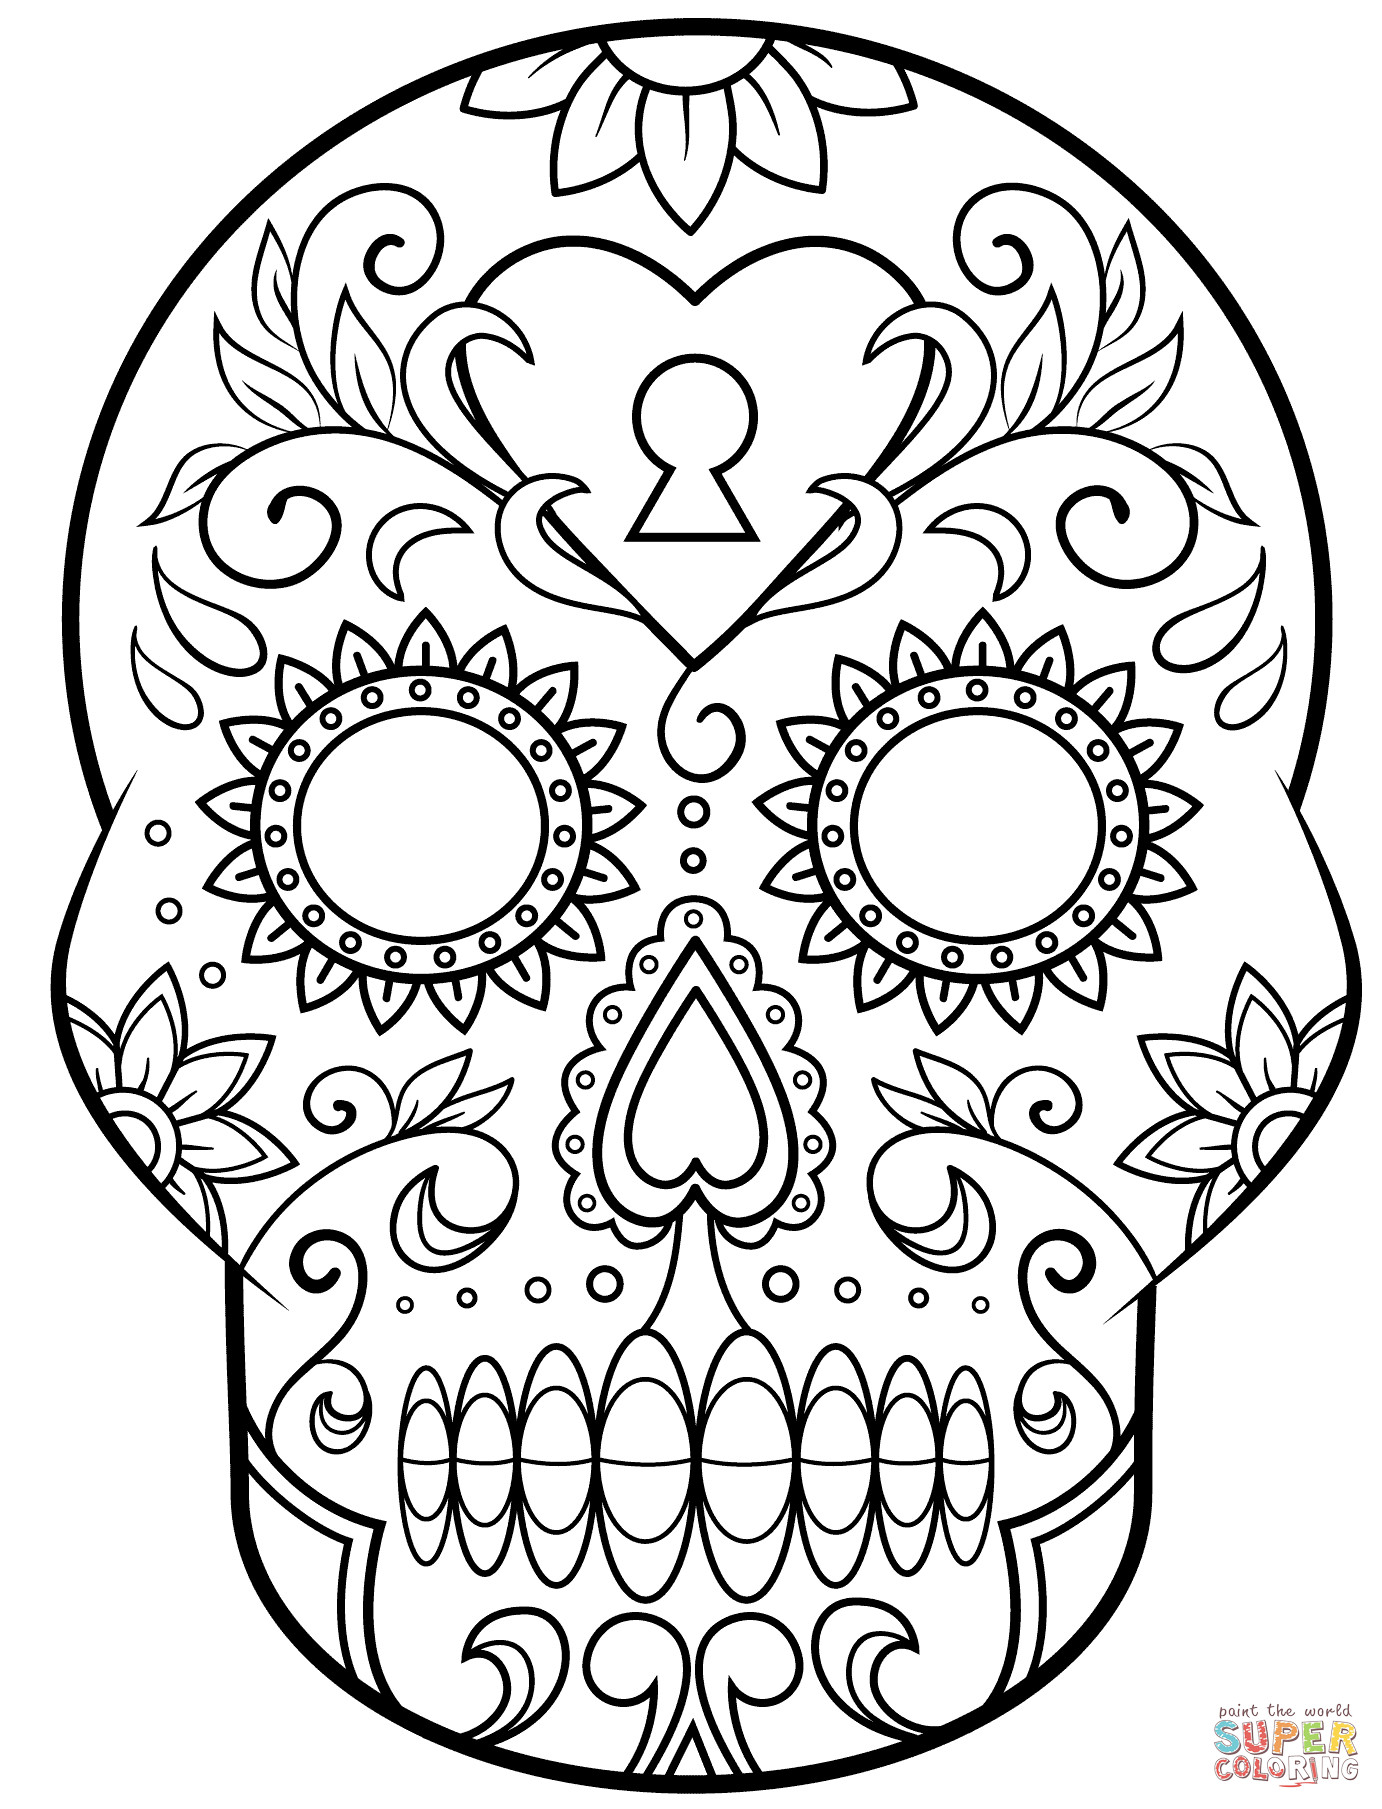 Sugar Skull Coloring Pages
 Day of the Dead Sugar Skull coloring page